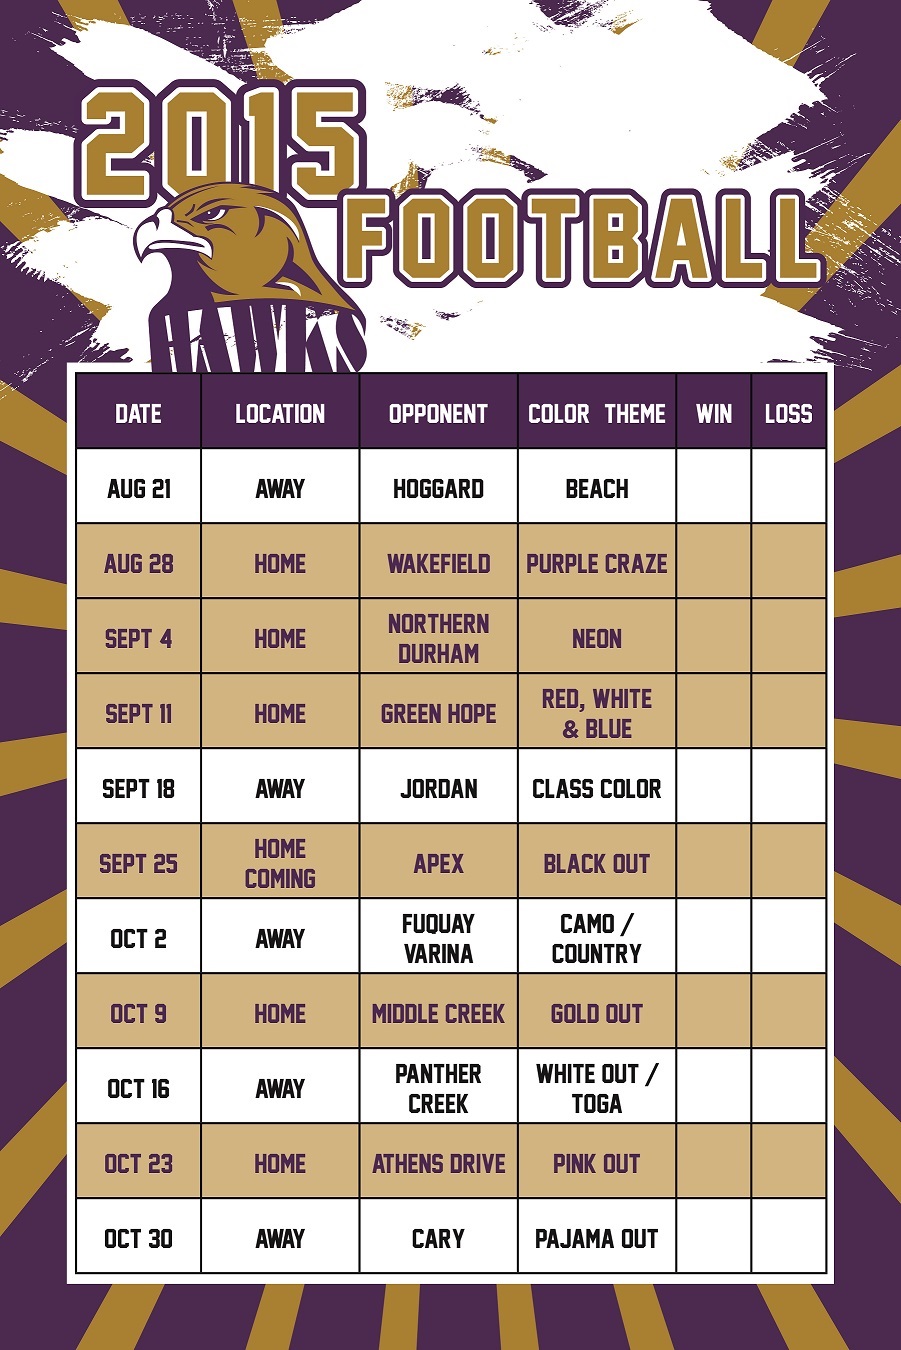 High School Football Schedule Win/Loss Poster | Graphic design services in eastern NC, Morehead